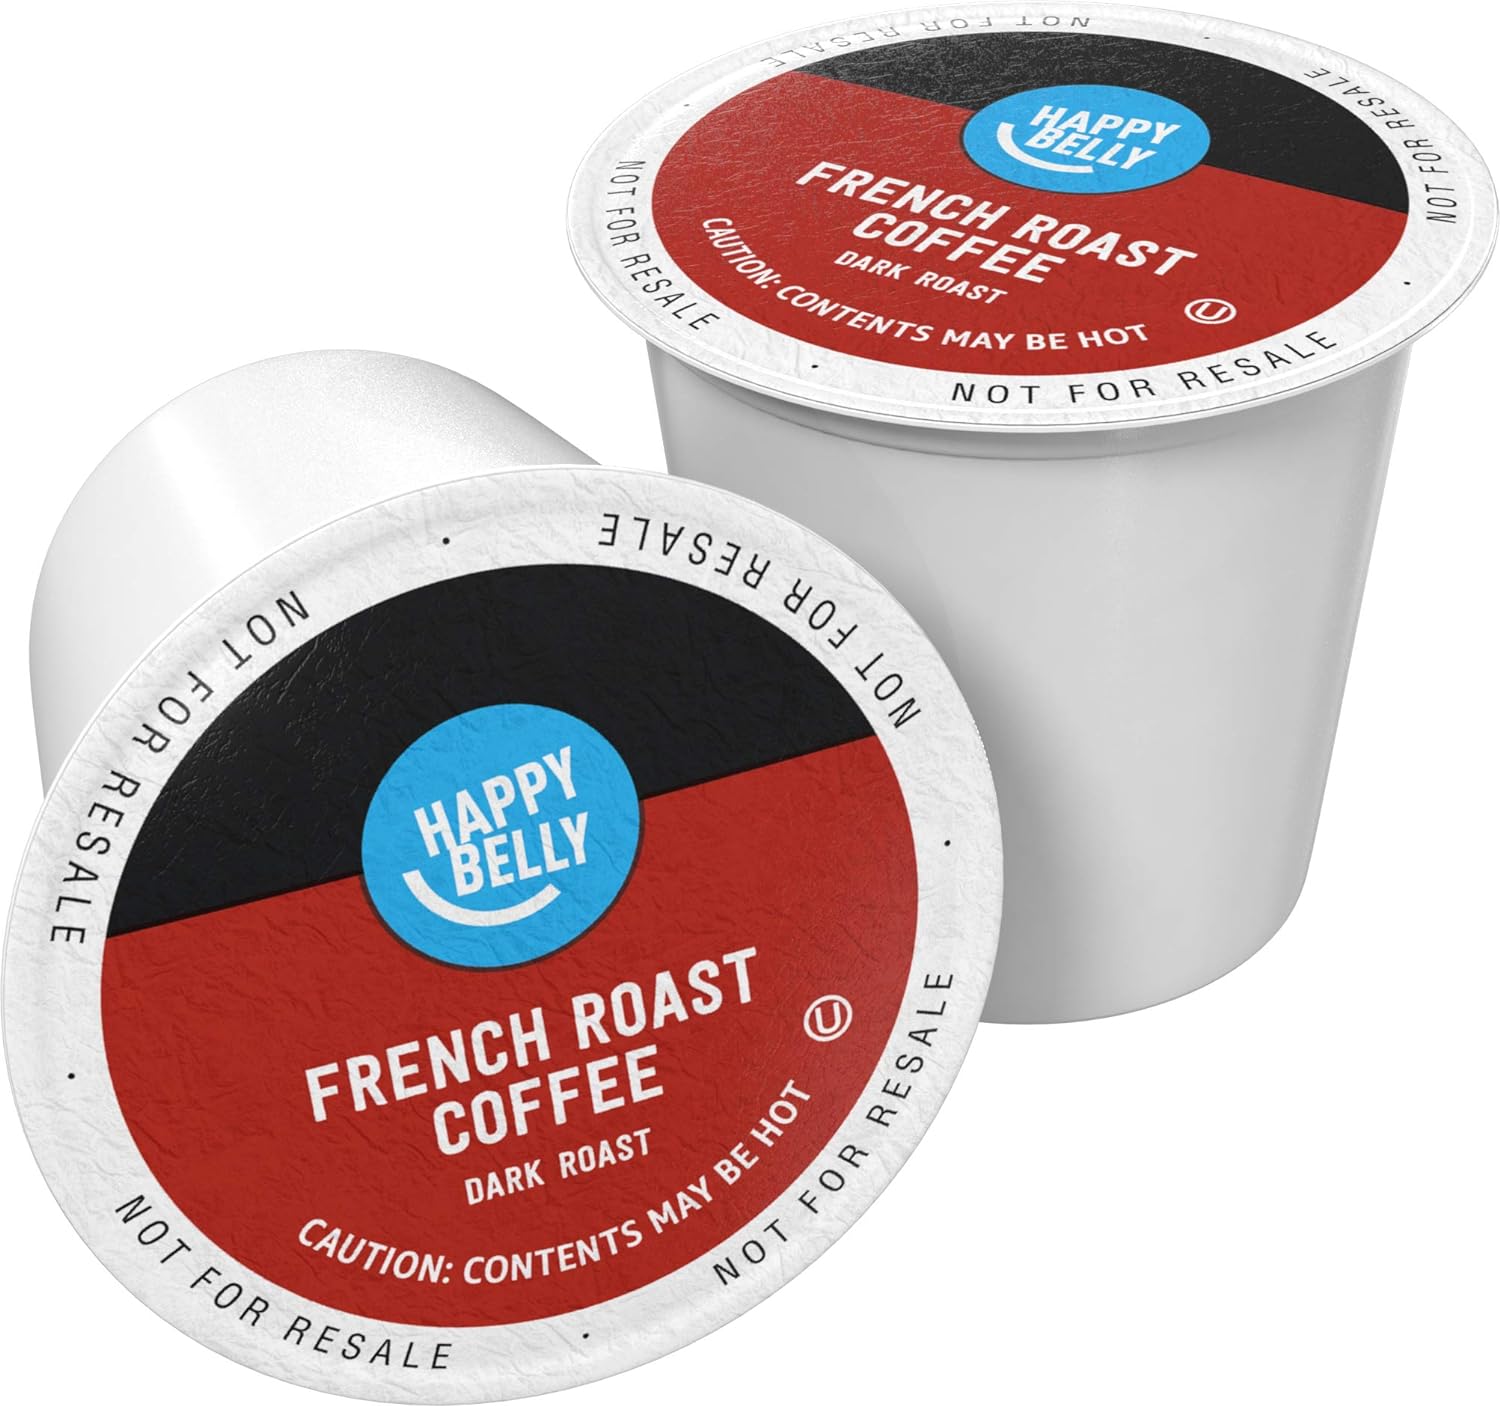 Amazon Brand - Happy Belly Dark Roast Coffee Pods, French Roast, Compatible with Keurig 2.0 K-Cup Brewers, 24 Count